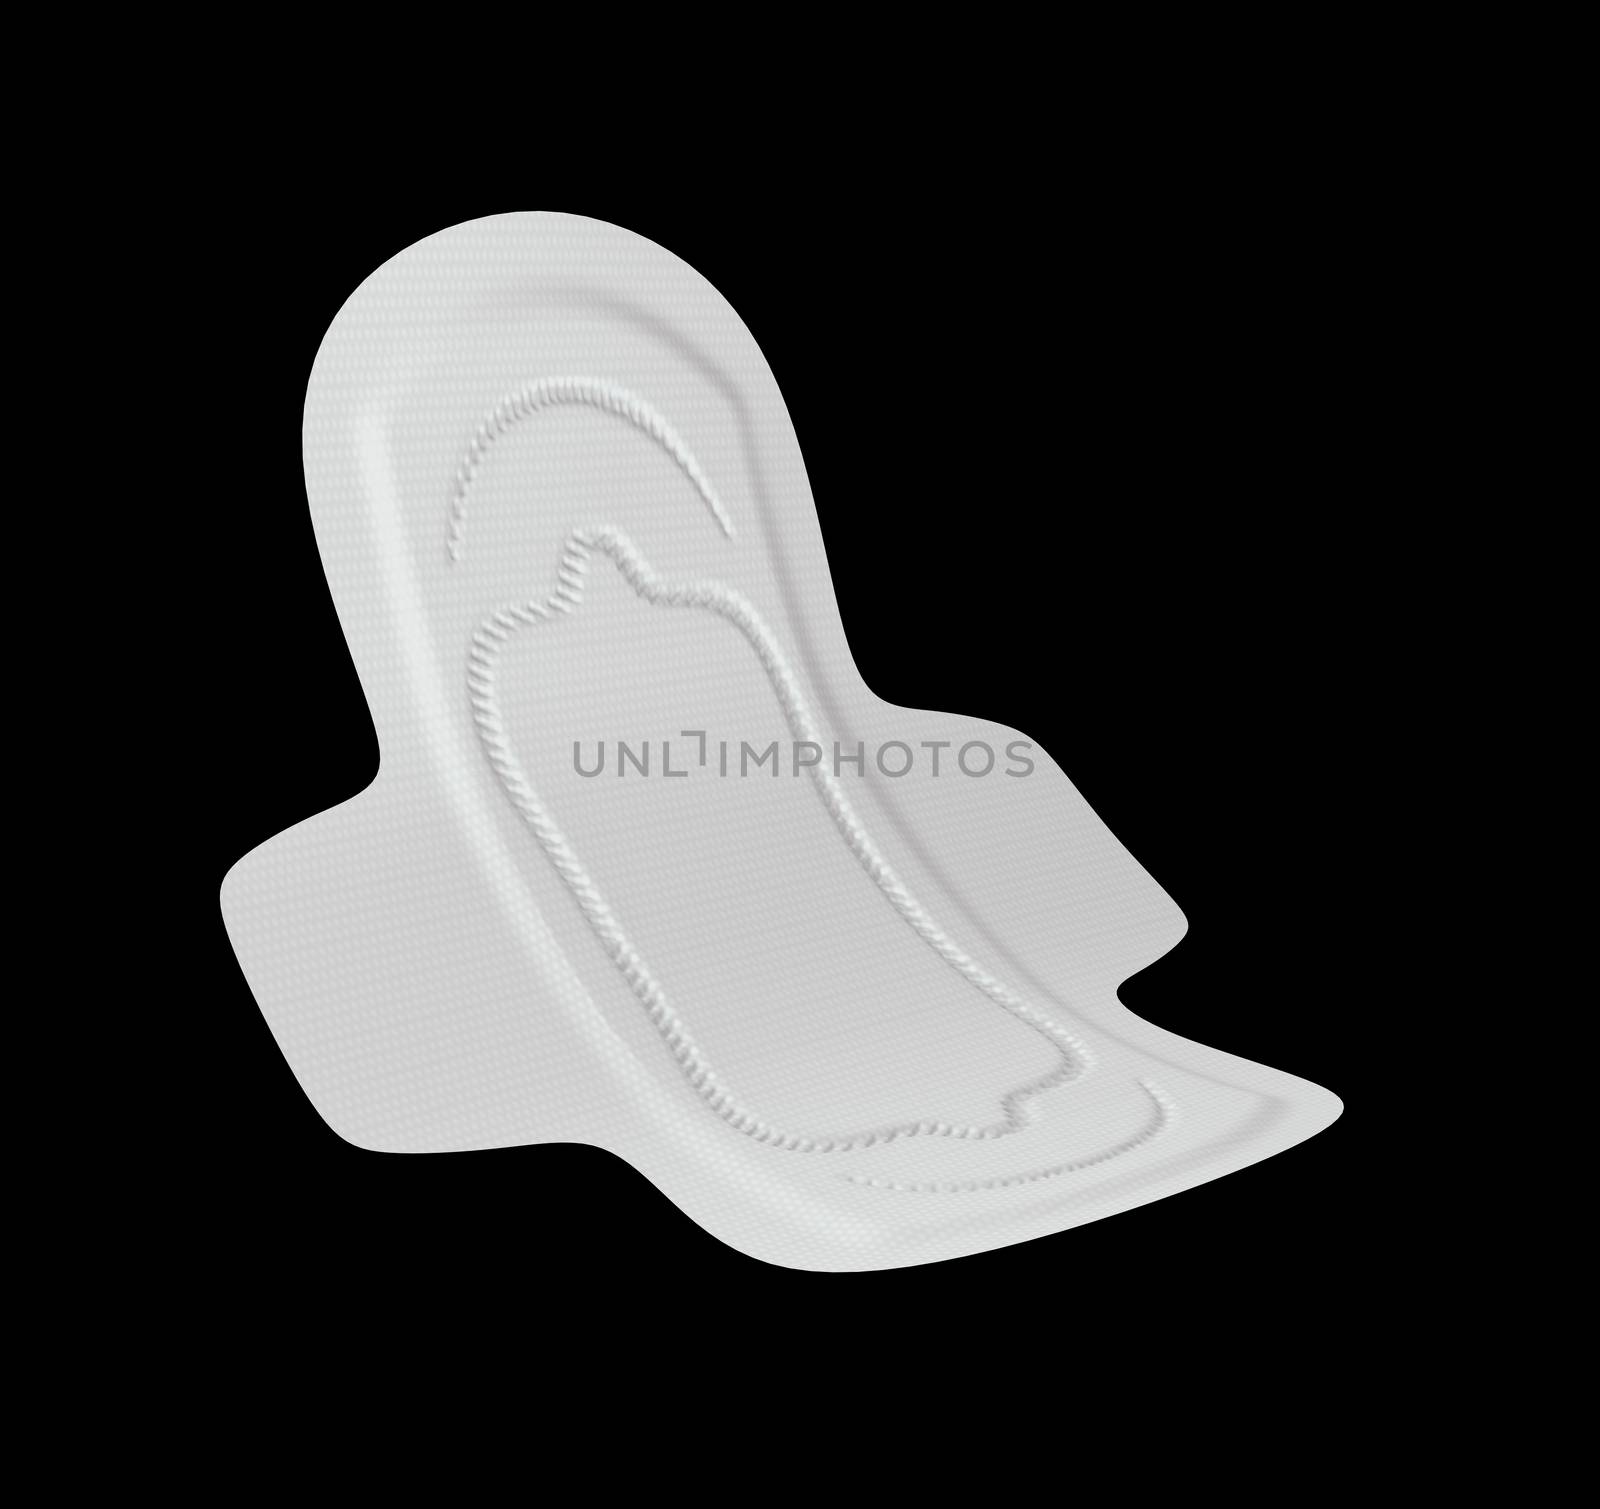 a 3D render of a woman's sanitory pad or panty liner on black background